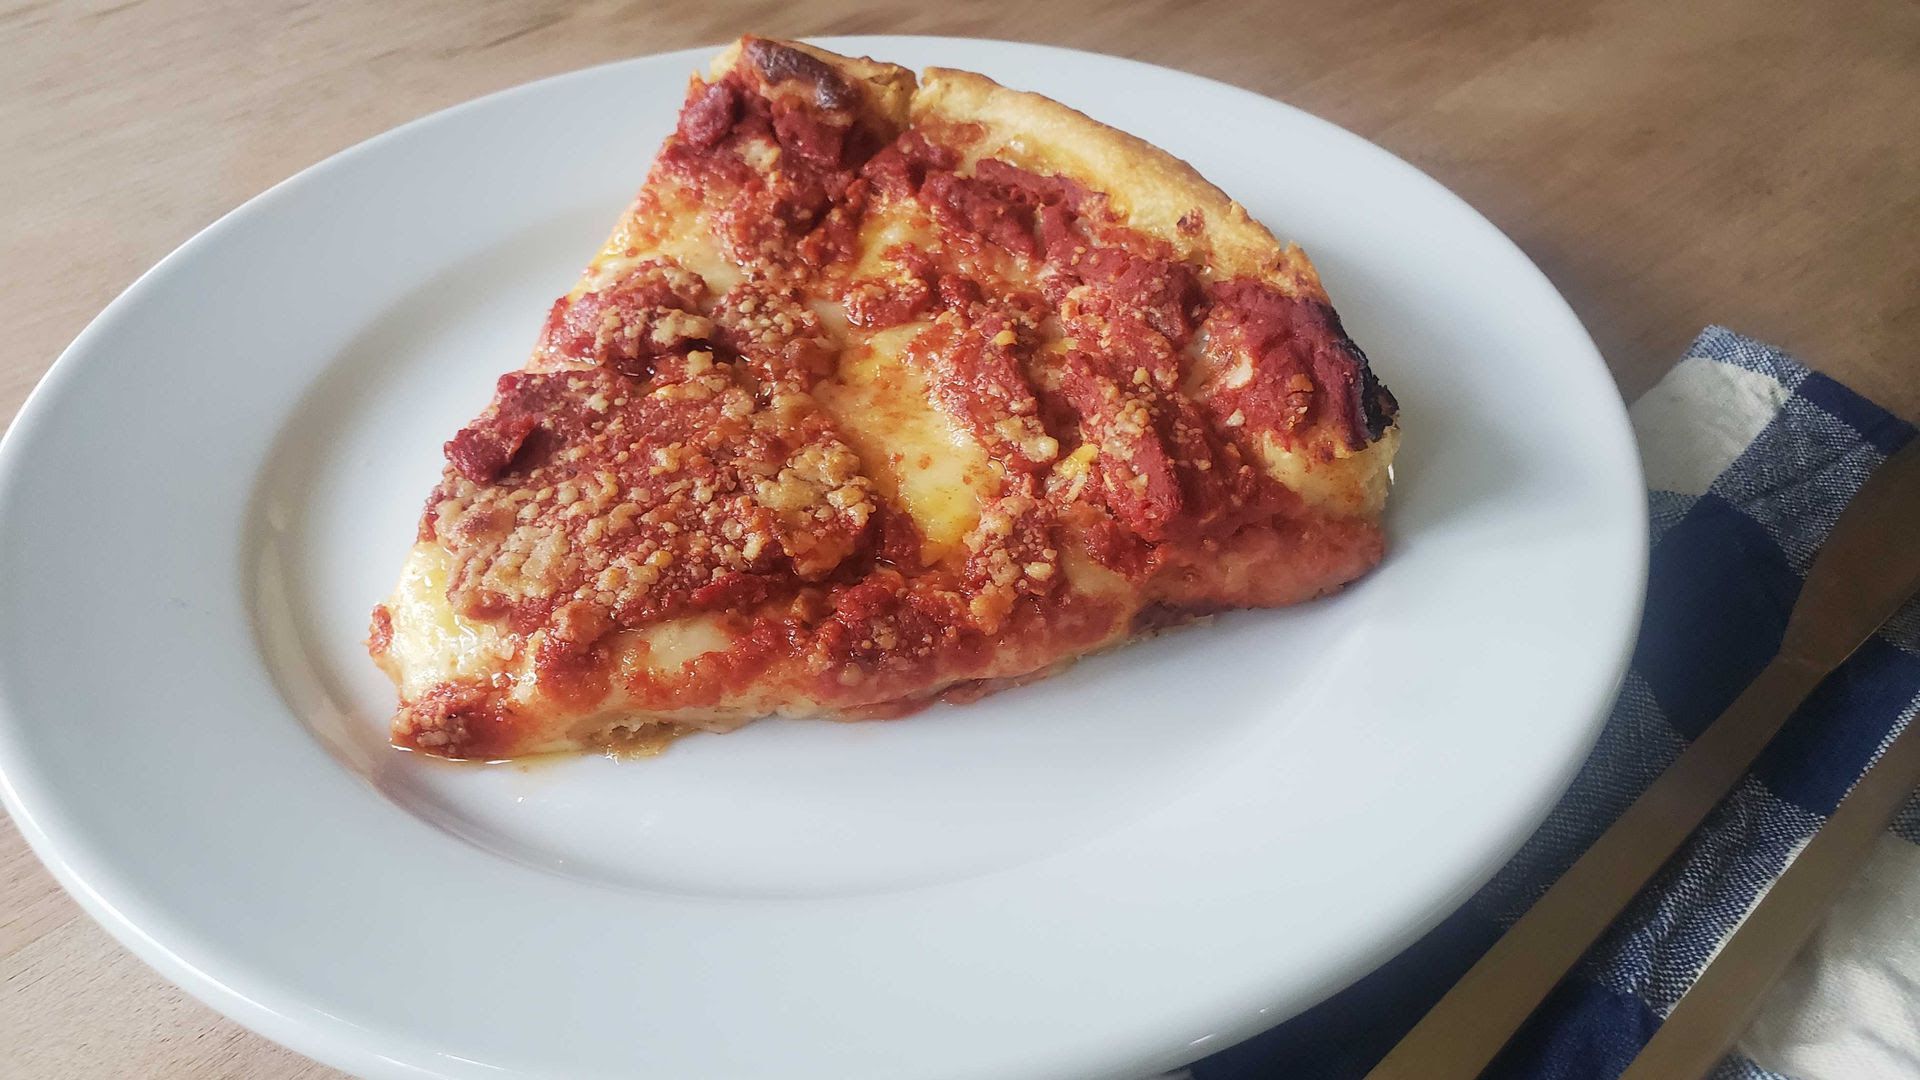 A slice of pizza from 312 Pizza Co.